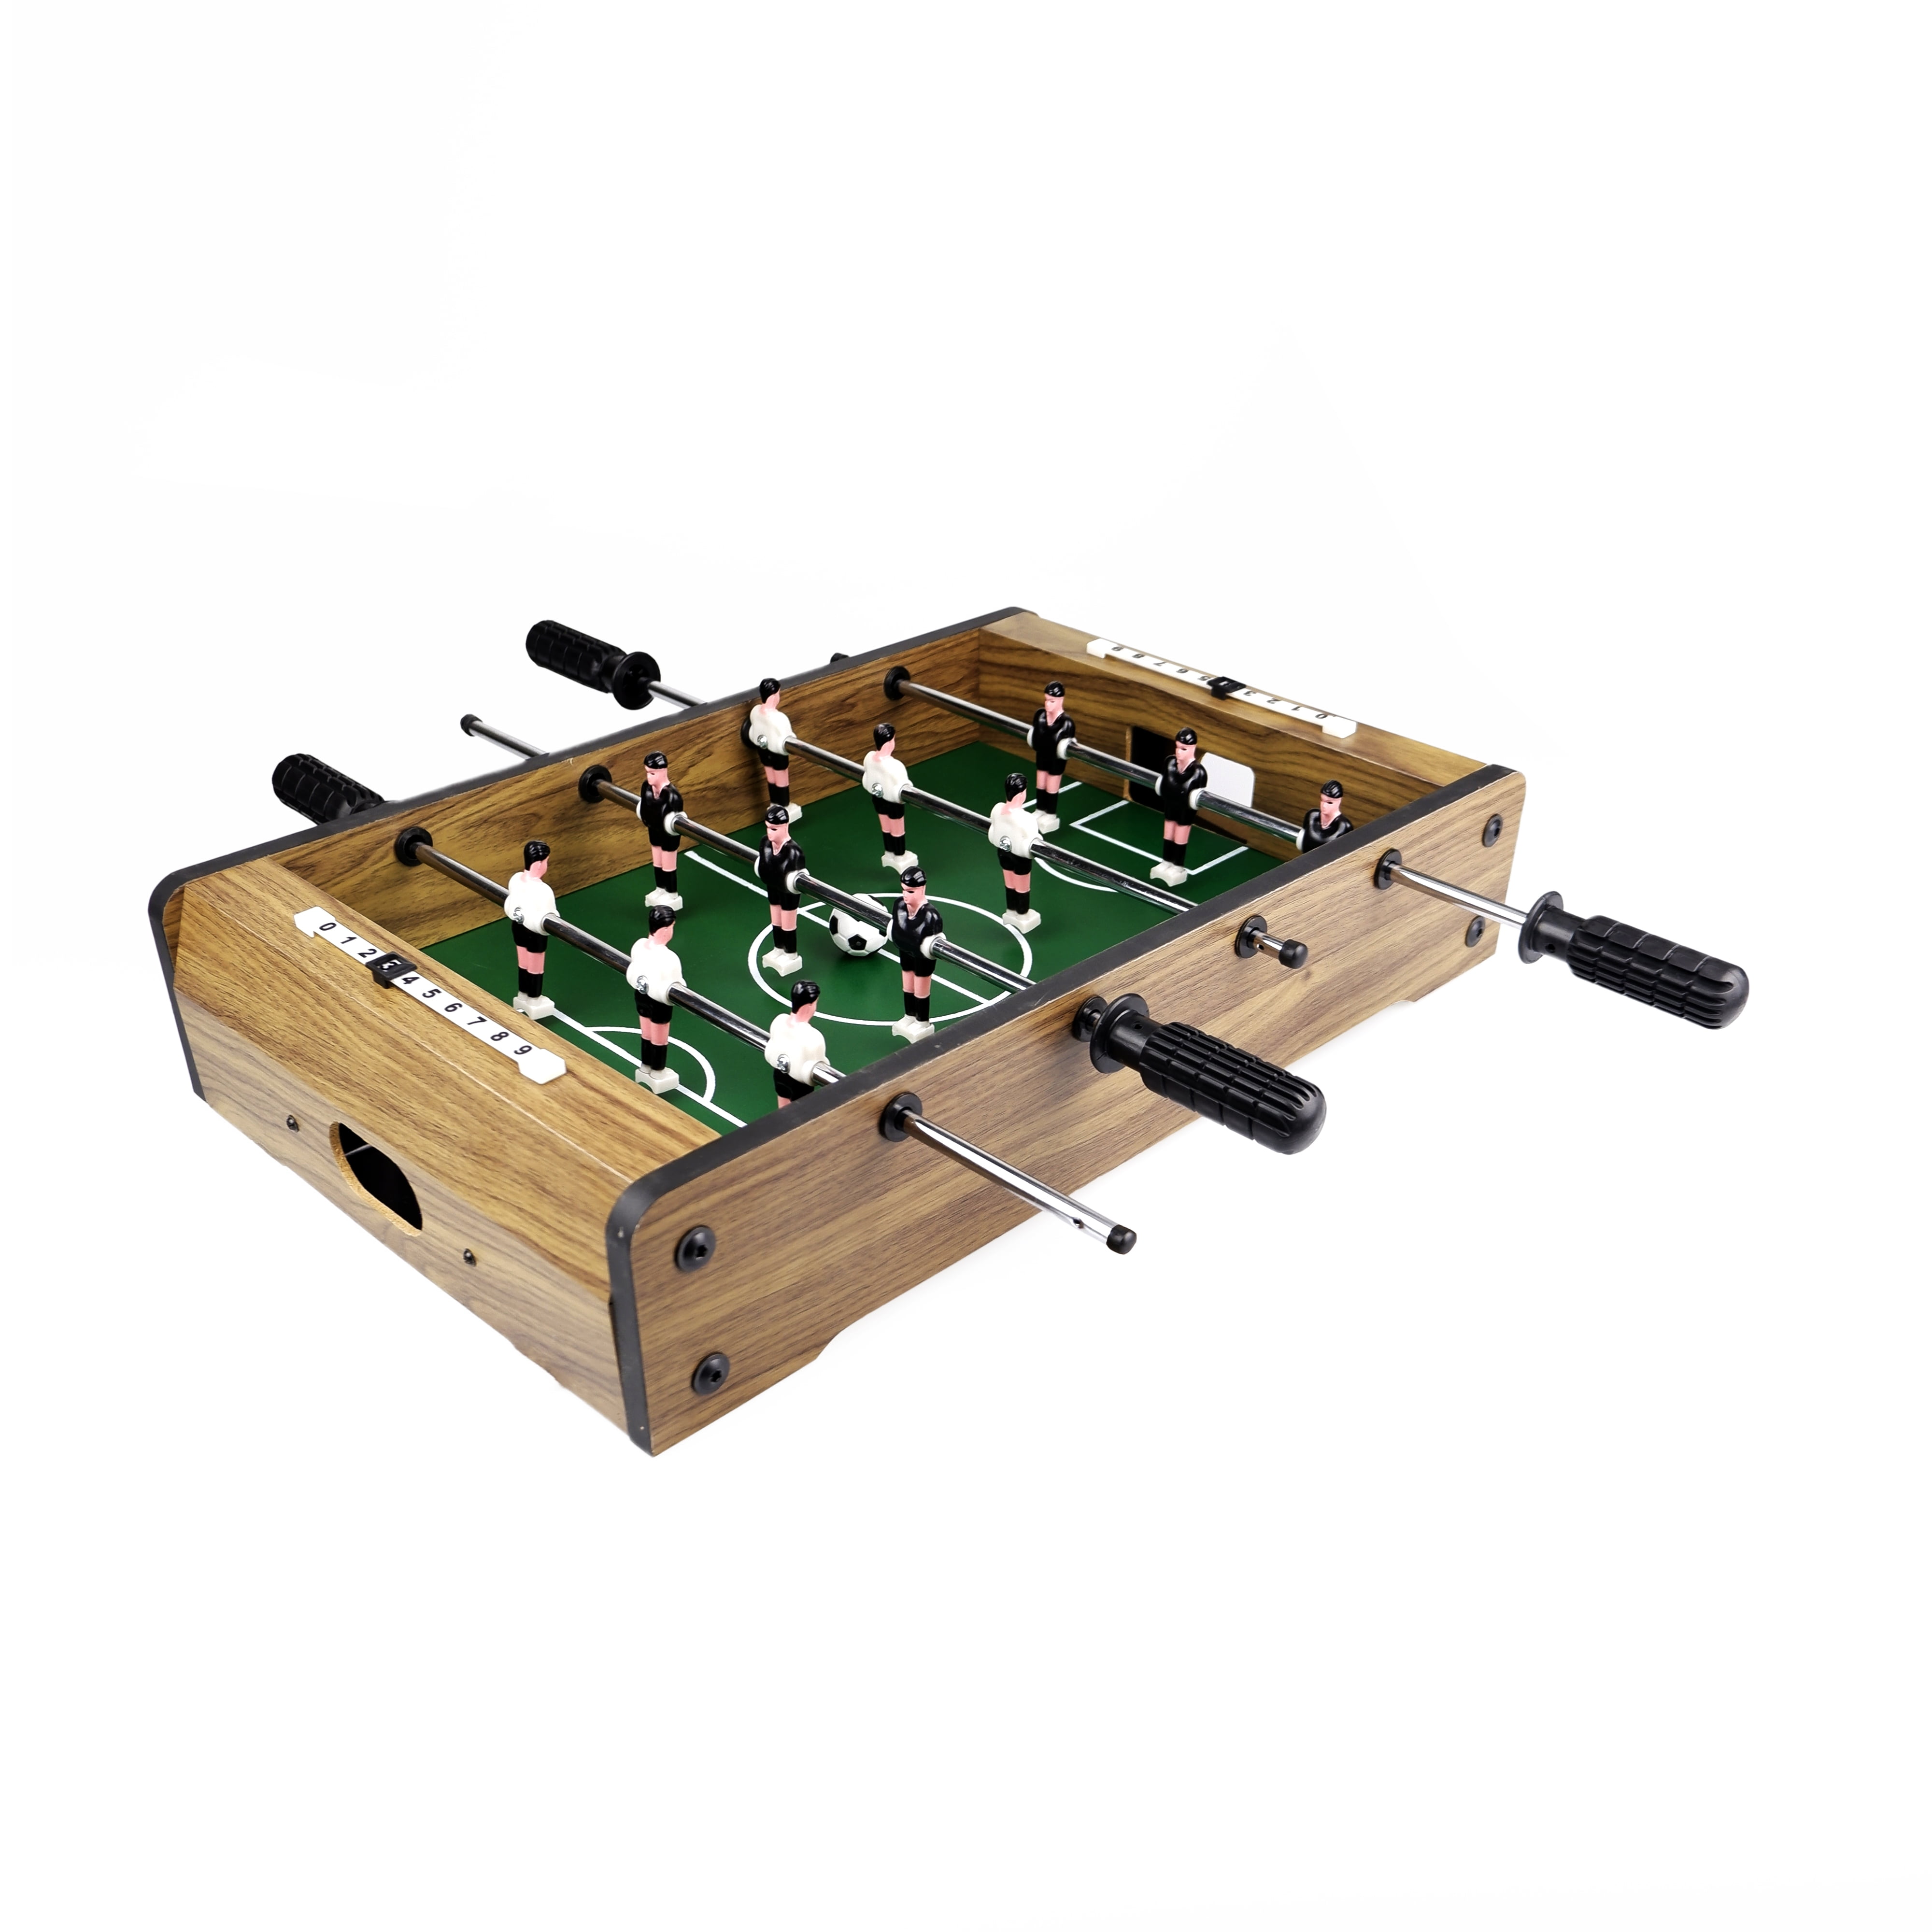 EDTara 12 Pcs Plastic Table Football Foosball Soccer Ball Indoor Game Part for Adults and Kids